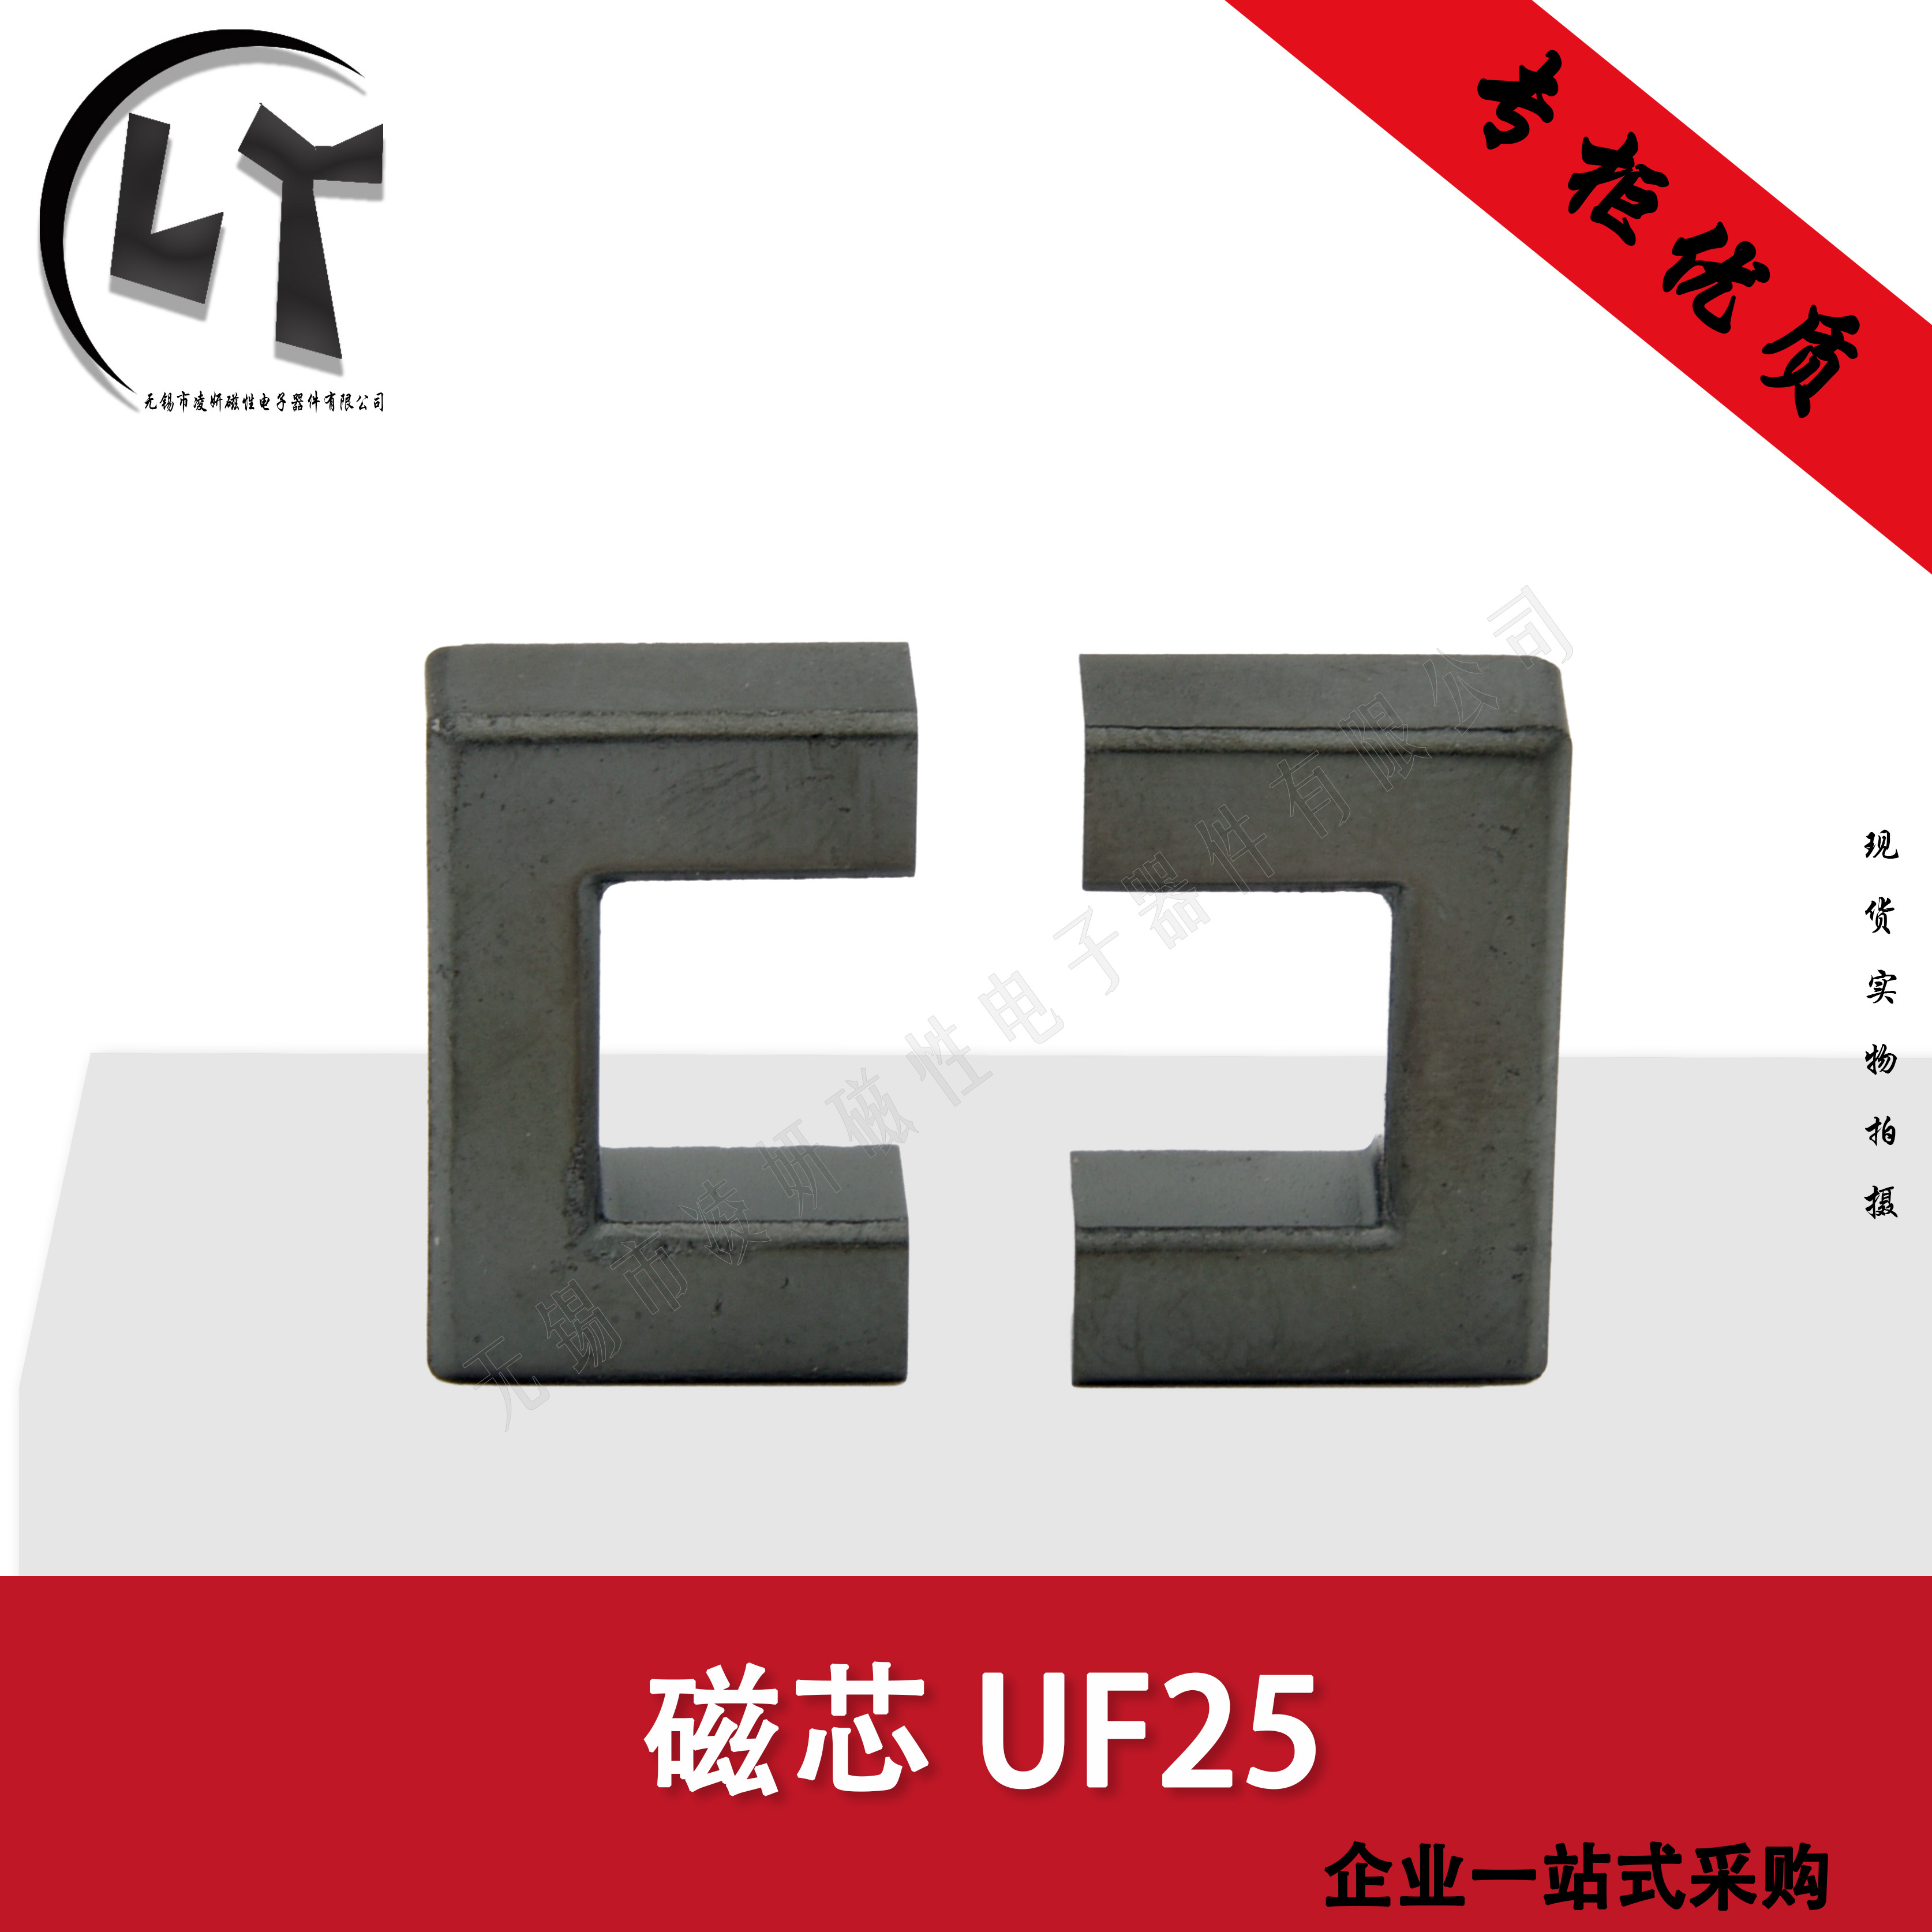 Manganese Zinc Ferrite High Power PC40 Material High Performance Core for UF25 High Frequency Transformer